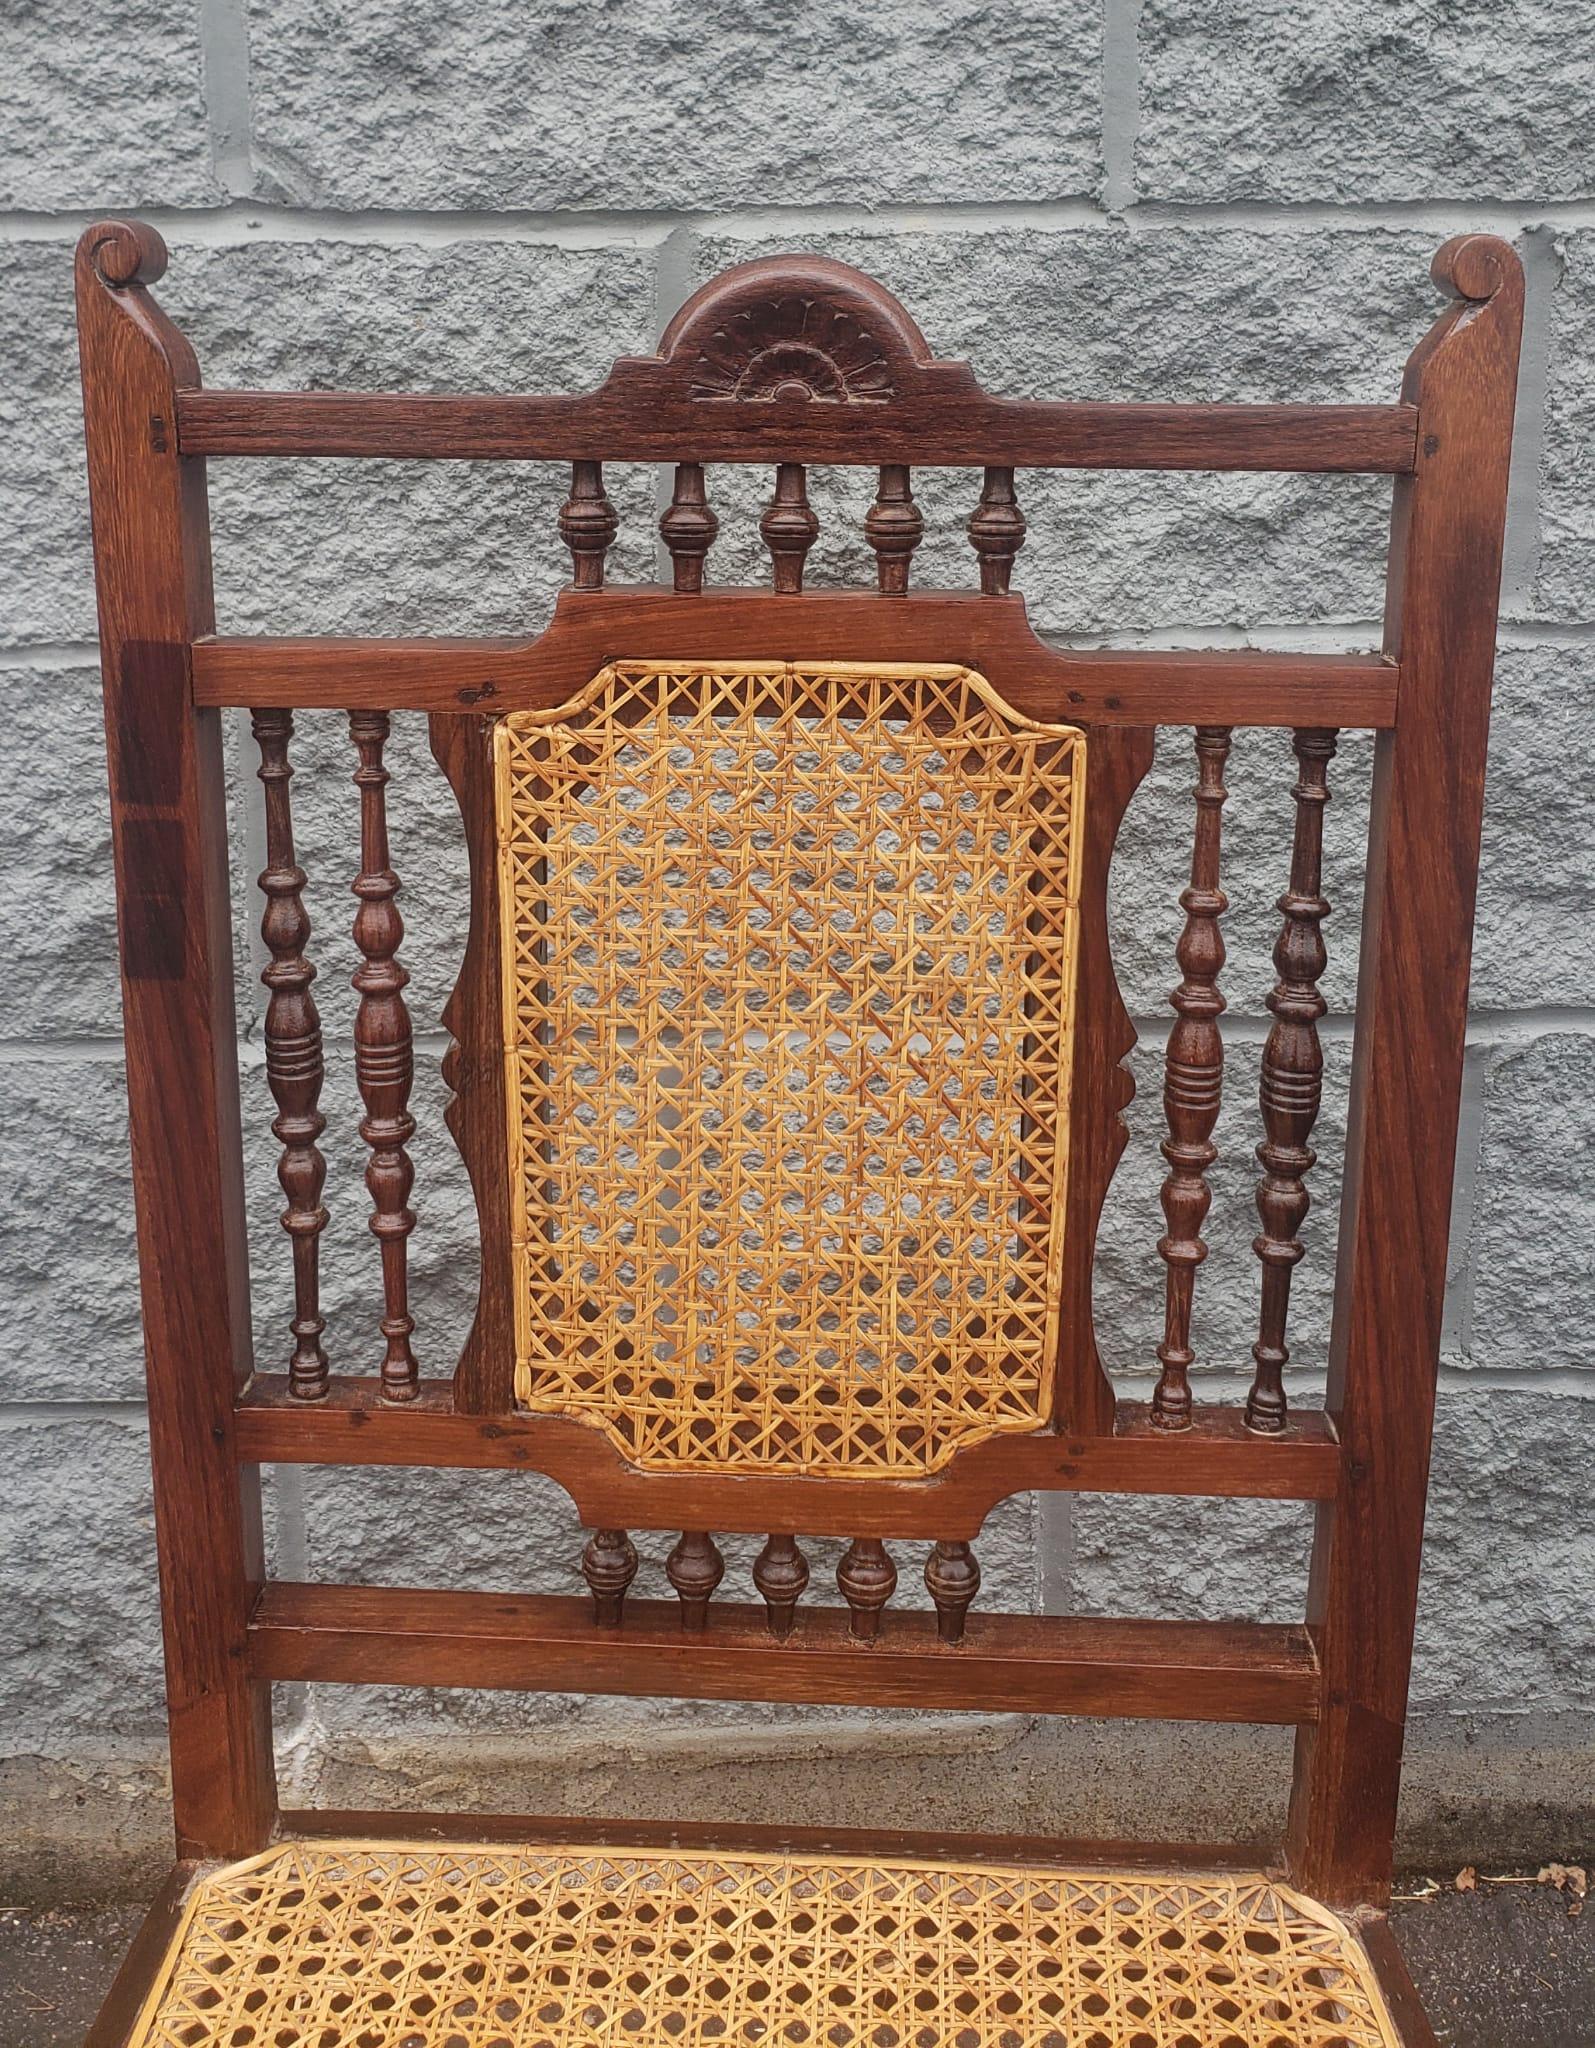 An exquisite pair of Anglo-Indian hardwood and rosewood cane seat and back handcrafted side chairs. Newer caning in great condition. Mini spindles decorated on all sides and front.